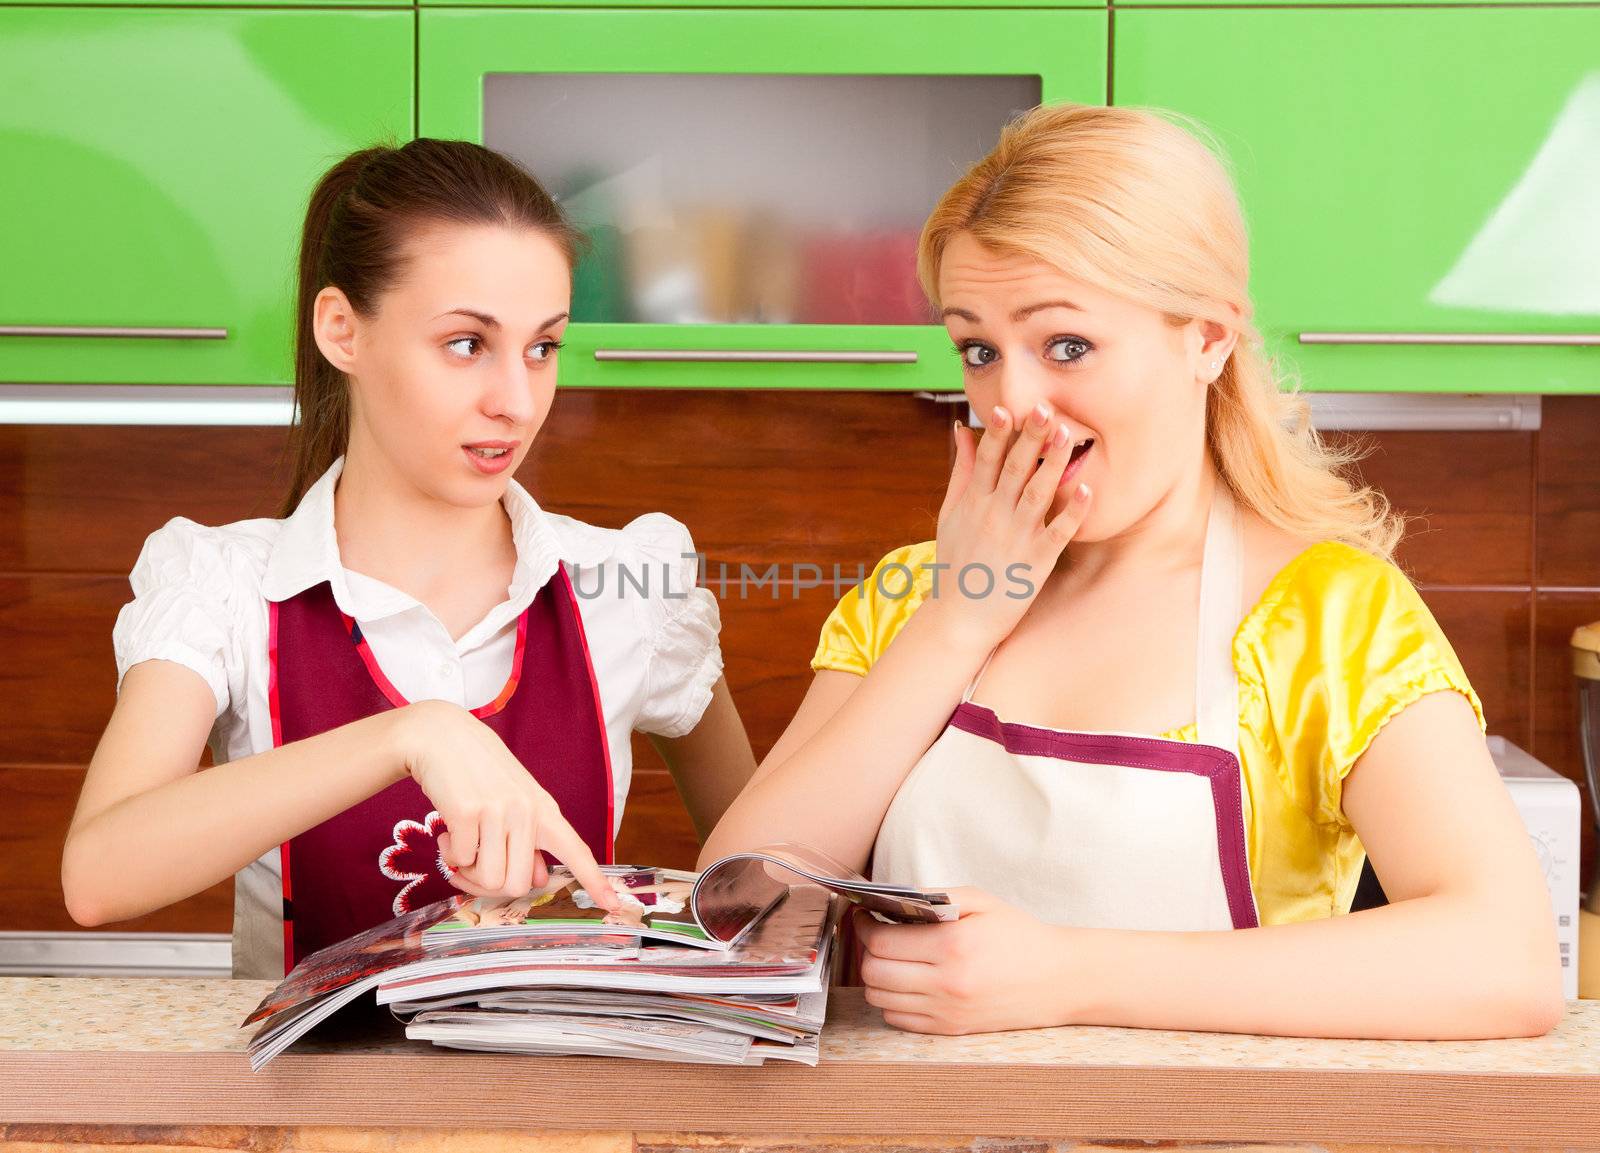 Two young women discuss fashion magazines in the kitchen